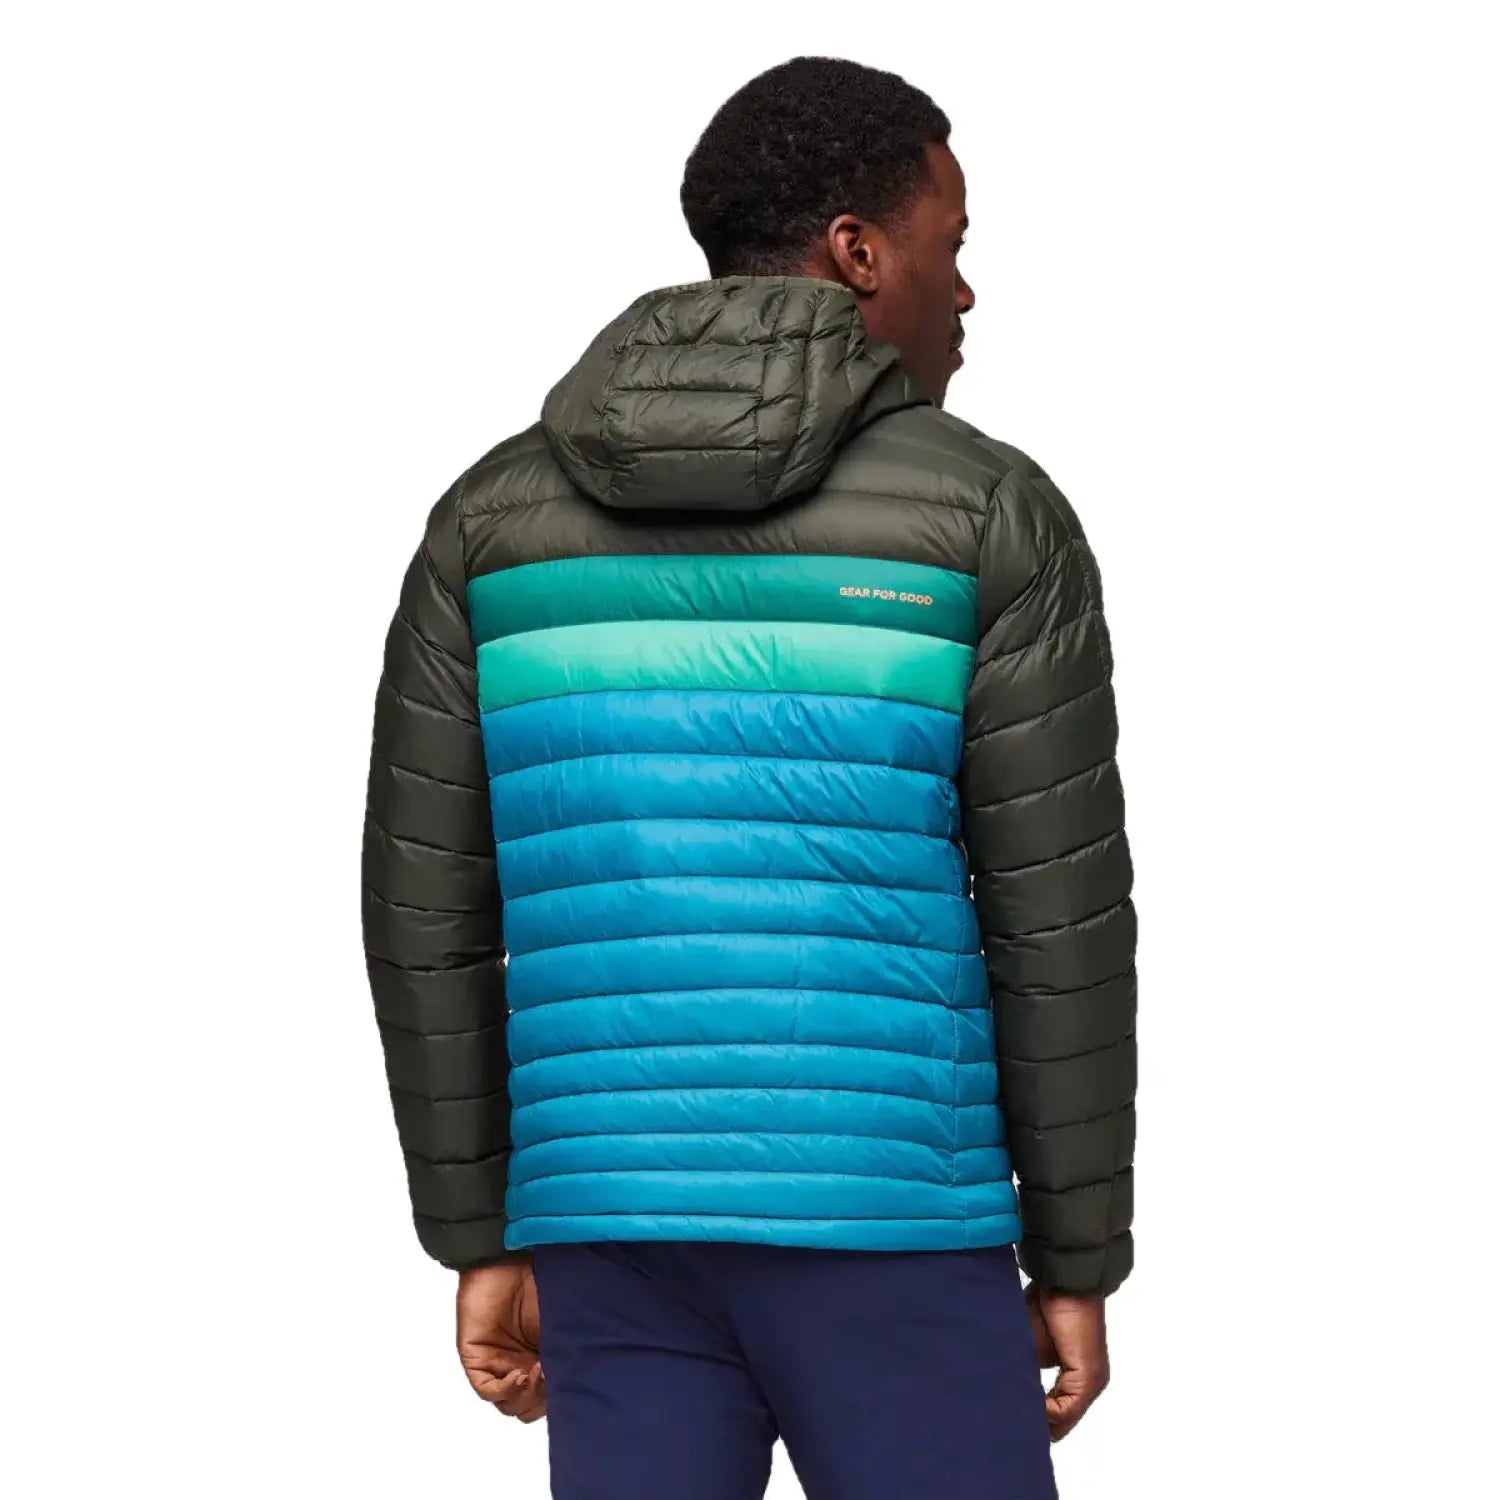 Cotopaxi M's Fuego Hooded Down Jacket, Woods Gulf, back view on model